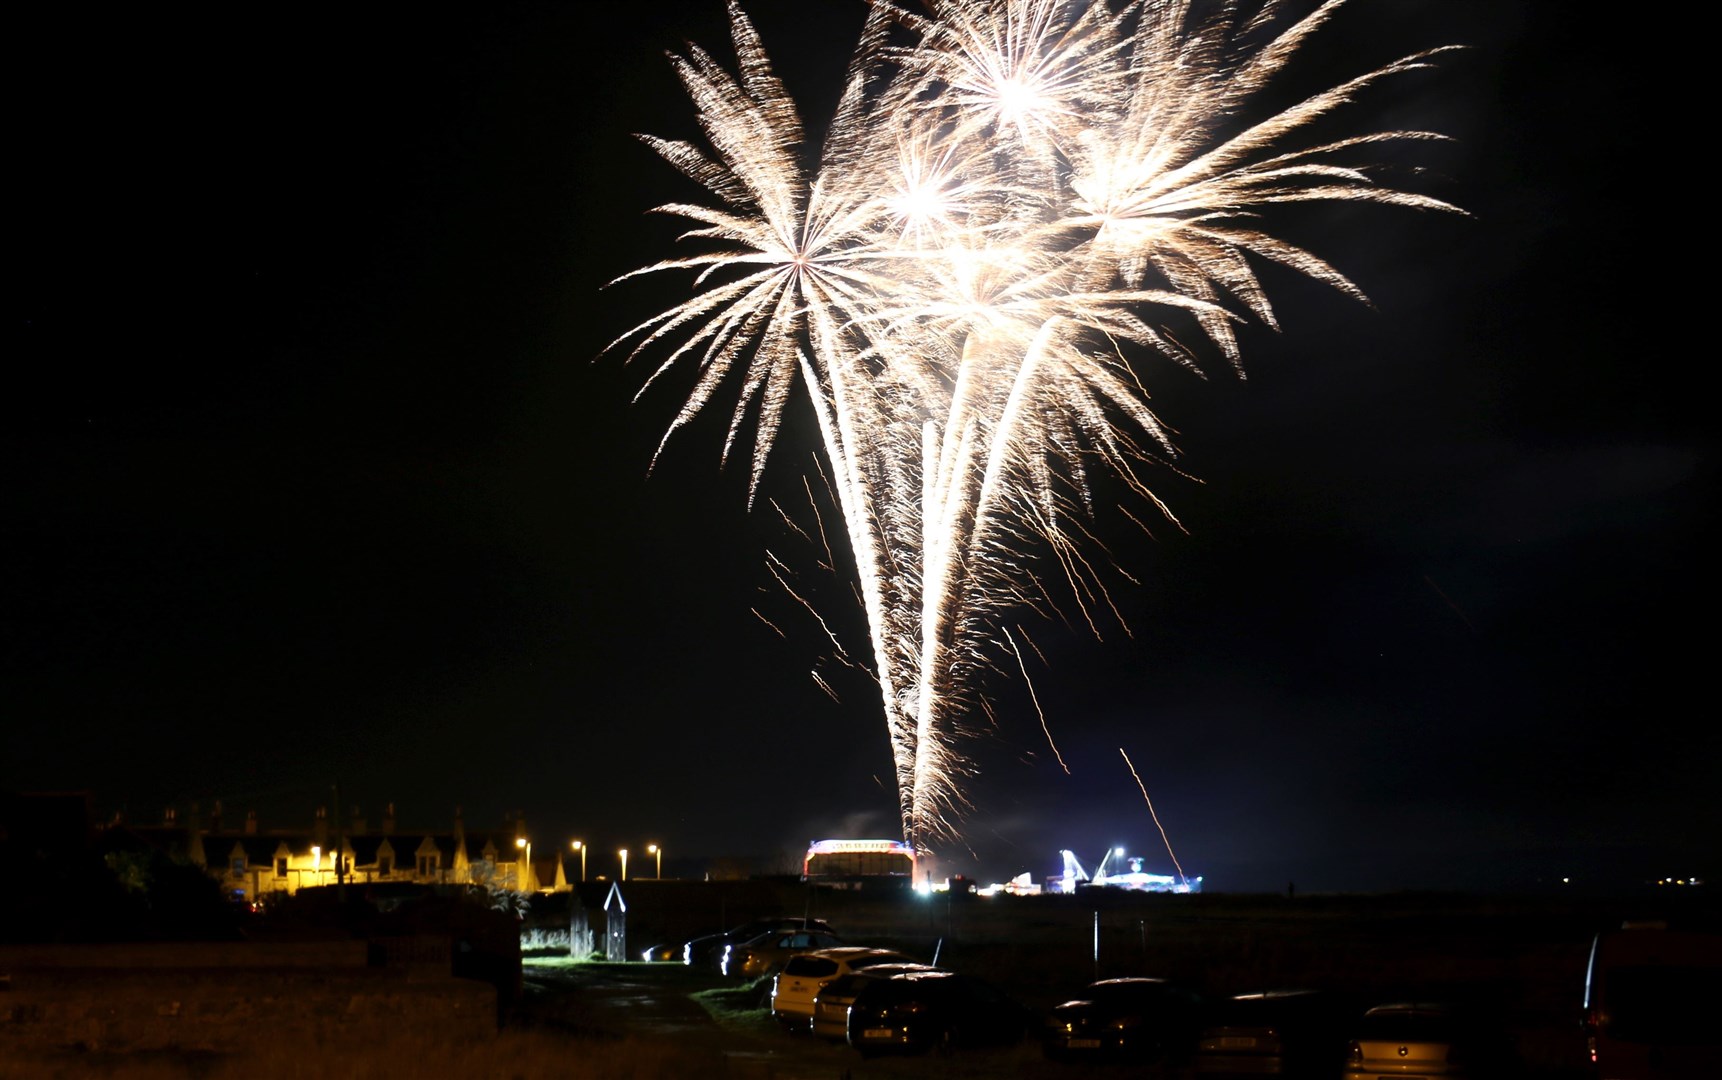 This year's Portgordon fireworks display could be the last. Picture: Becky Saunderson`````````````````````````````````````````````````````````````````````````````````````````````````````````````````````````````````````````````````````````````````````````````````````````````````````````````````````````````````````````````````1111111111111111111`````````````````````````````````````````````````````````````````````````````````````````````````````````````````````````````````````````````````````````````````````````````````````````````````````````````````````````````````````````````````````````````````````````````````````````````````````````````````````````````````````````````````````````````````````````````````````````````````````````````````````````````````````````````